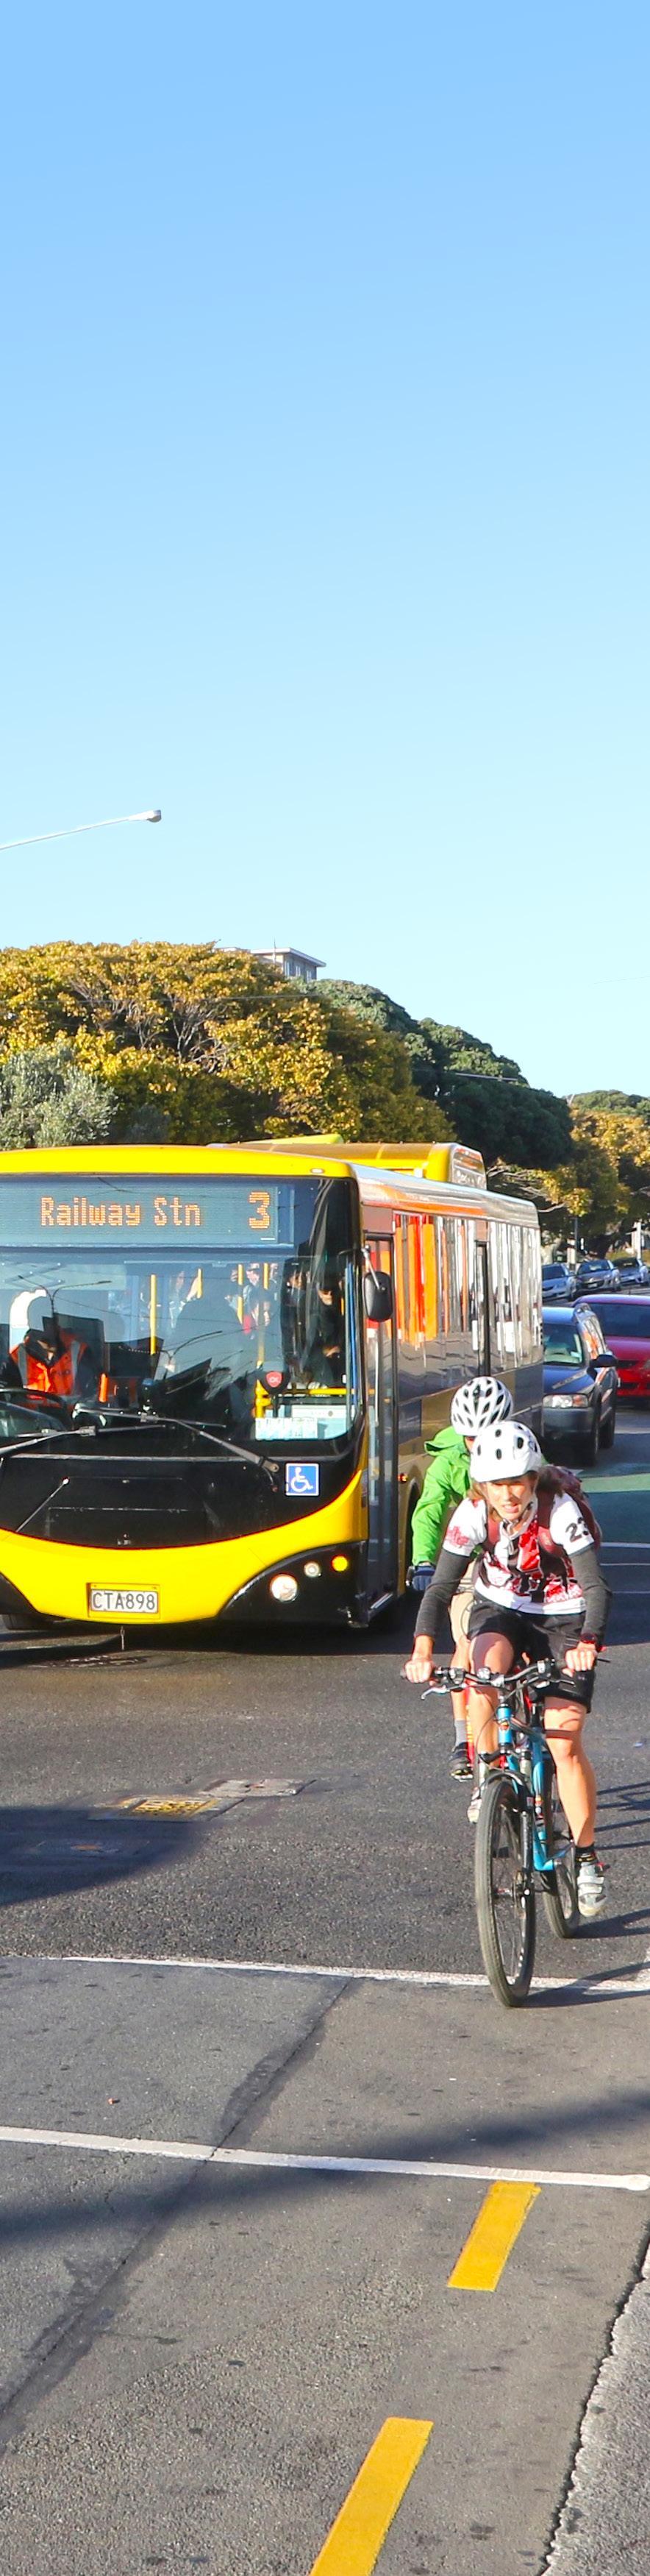 CASE STUDY LET S GET WELLINGTON MOVING Let s Get Wellington Moving (LGWM) is a joint initiative between Wellington City Council, Greater Wellington Regional Council, and the Transport Agency.